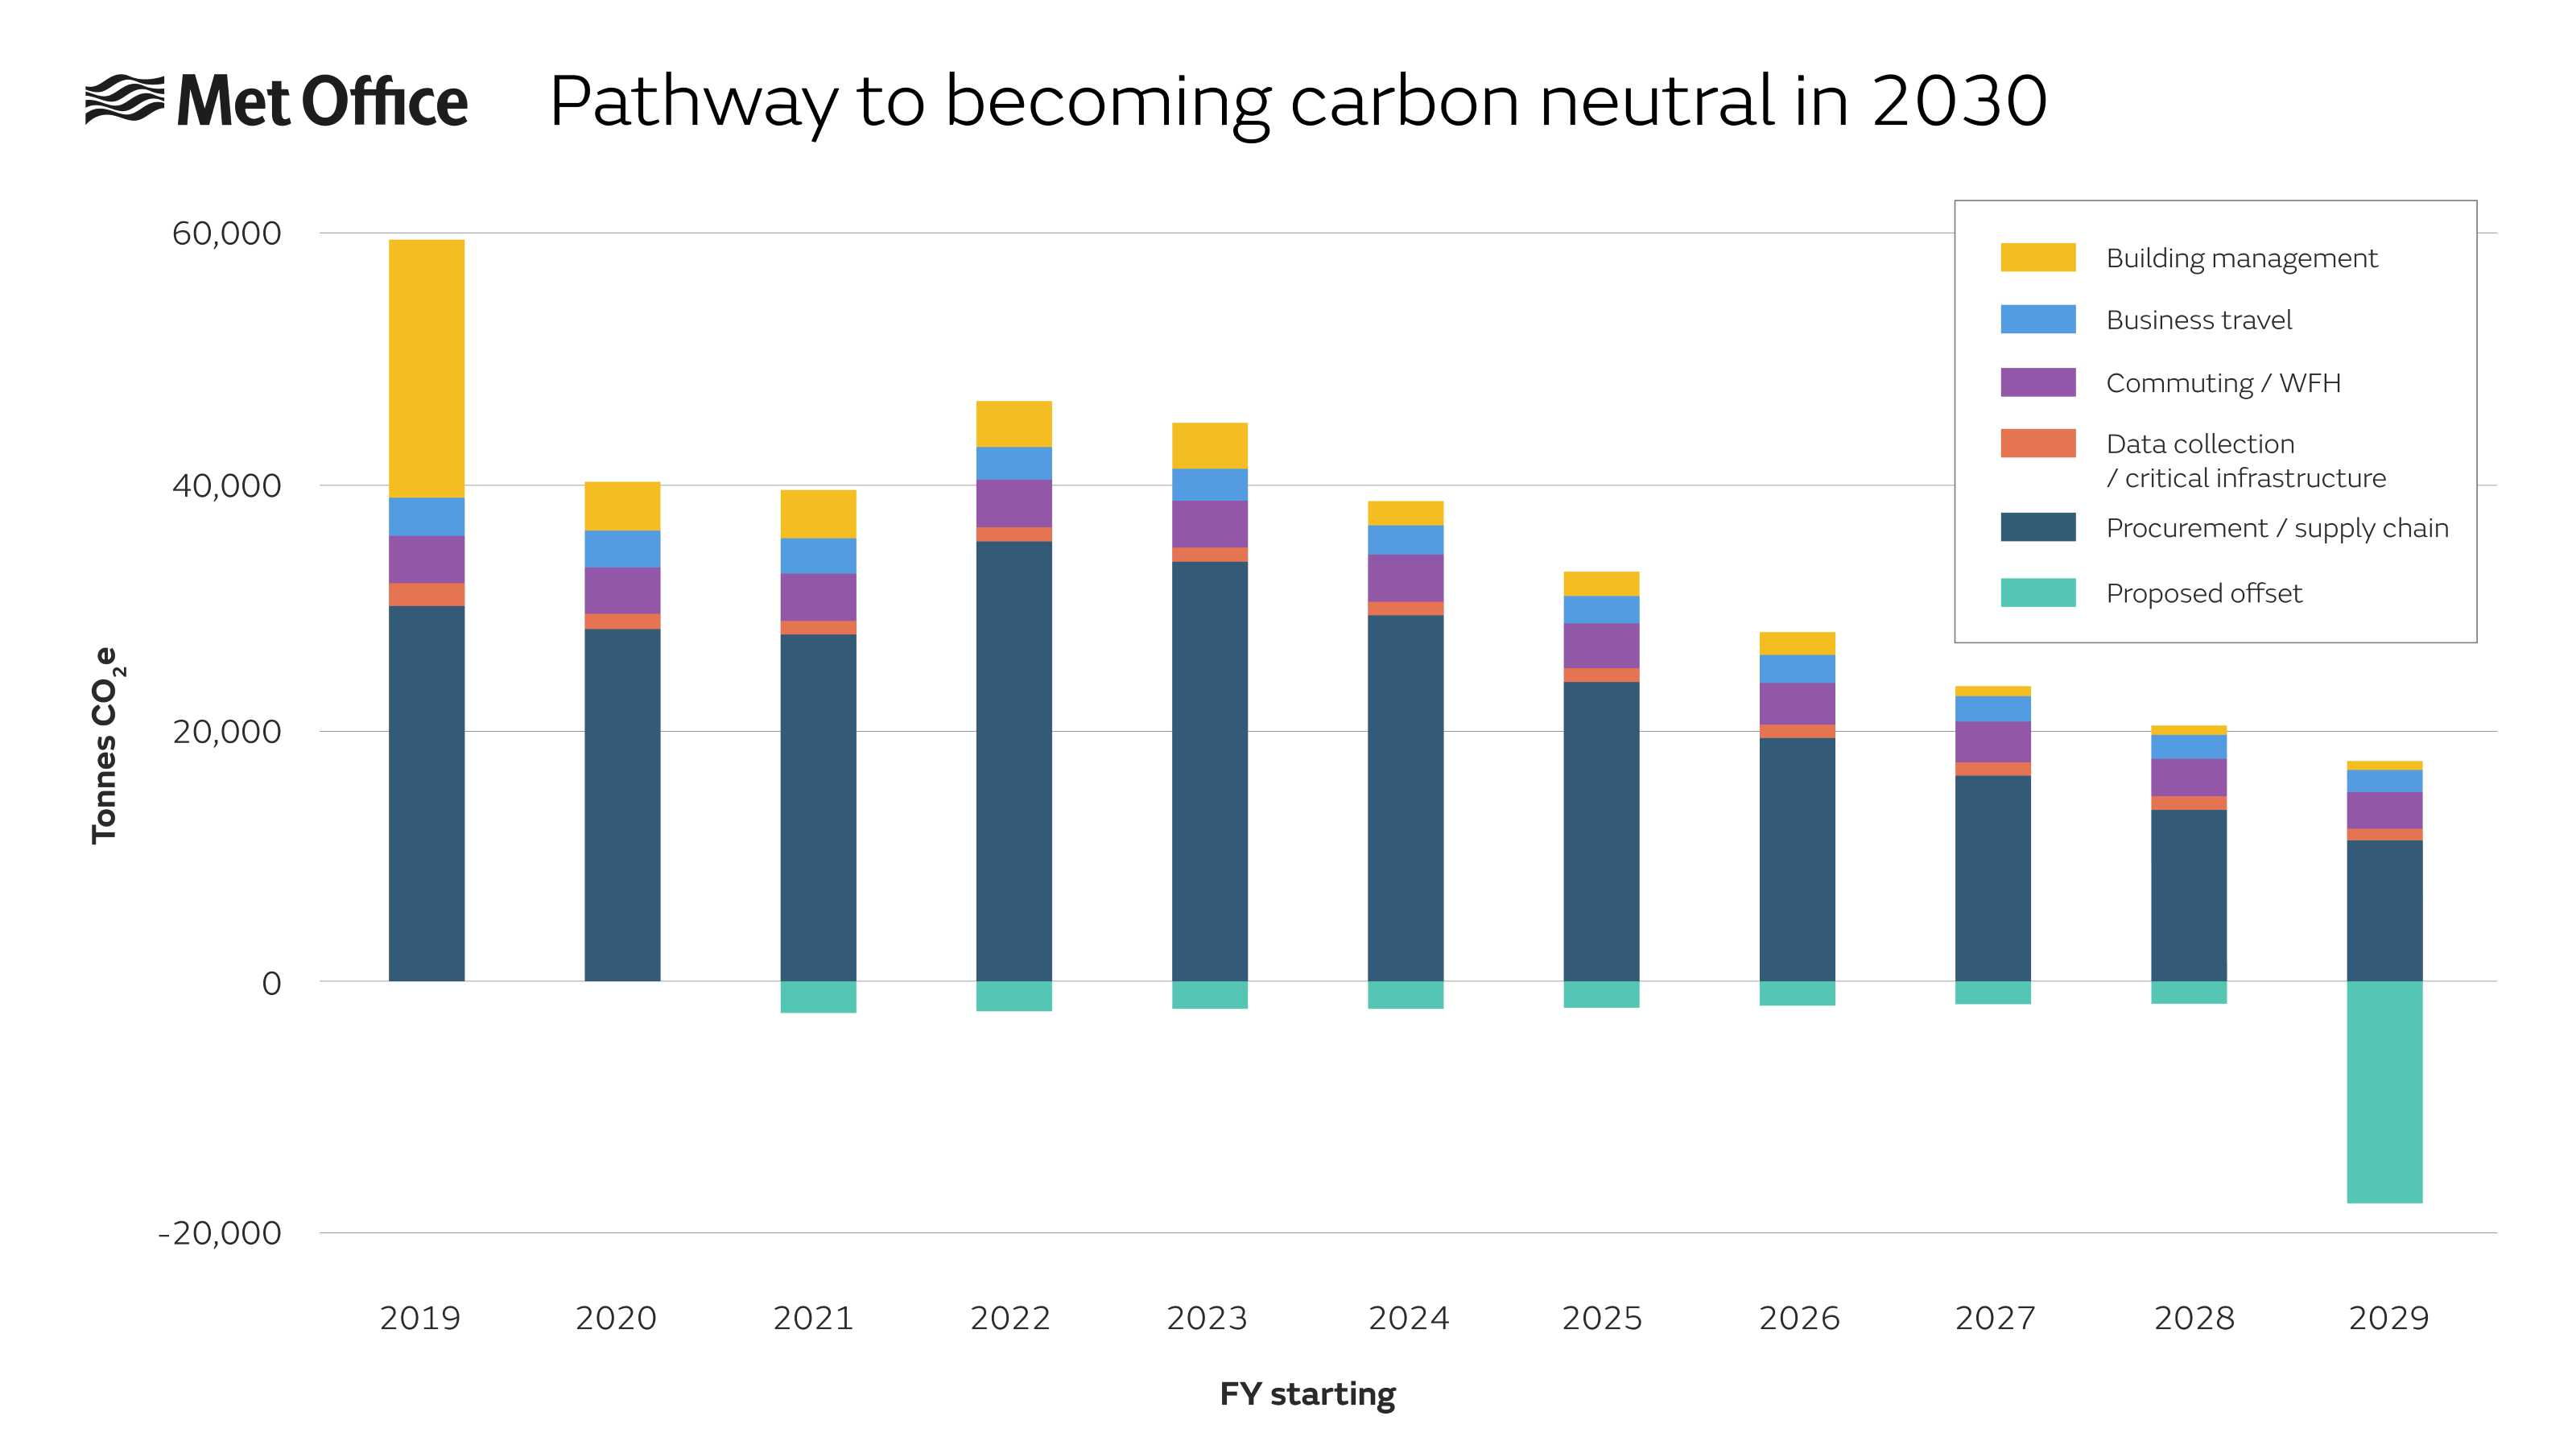 The graph shows the Met Office's aim for emissions over the coming years until 2030. The graph shows gradual reductions in emissions until 2029, when carbon offsetting is introduced.